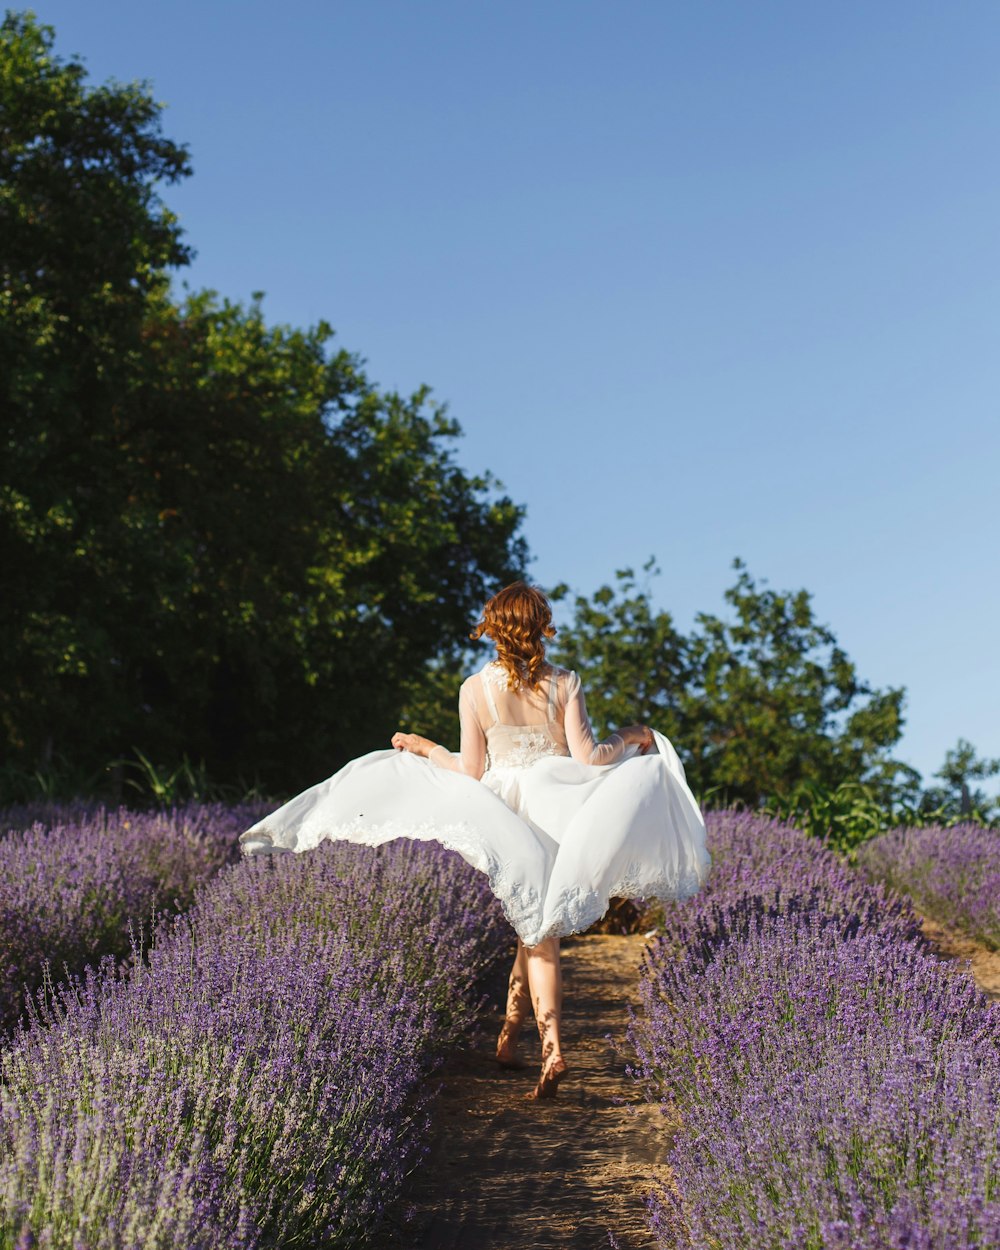 woman in white dress on purple flower field during daytime